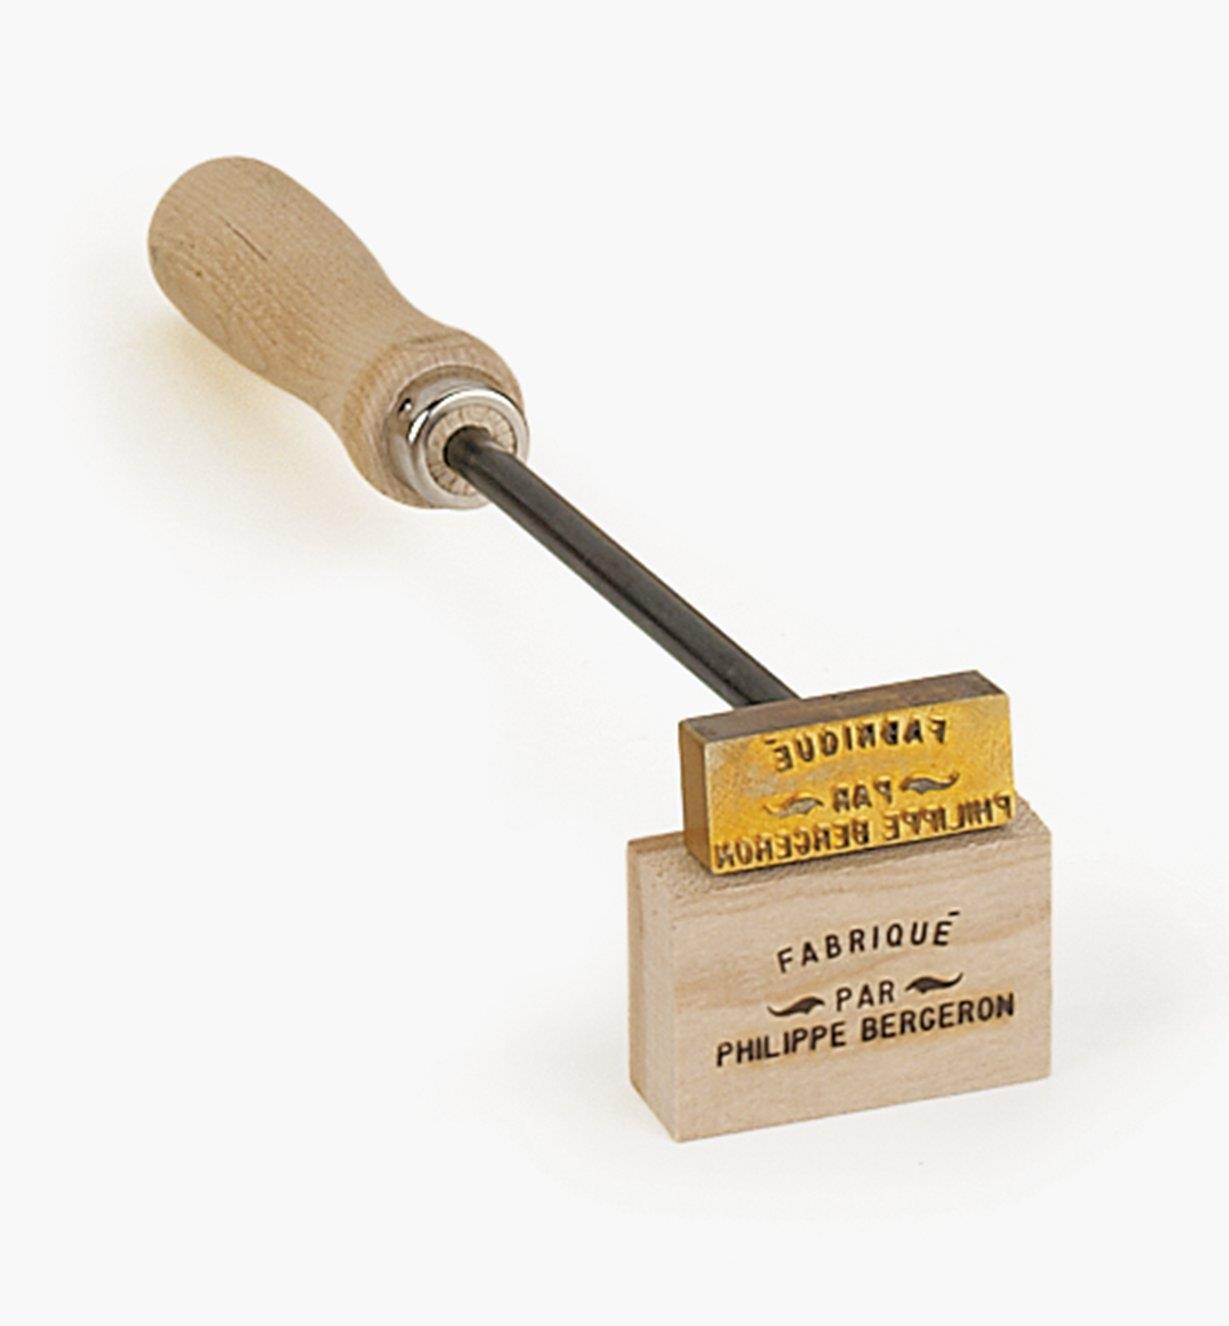 Example of brand made by FABRIQUÉ PAR arc non-electric branding iron